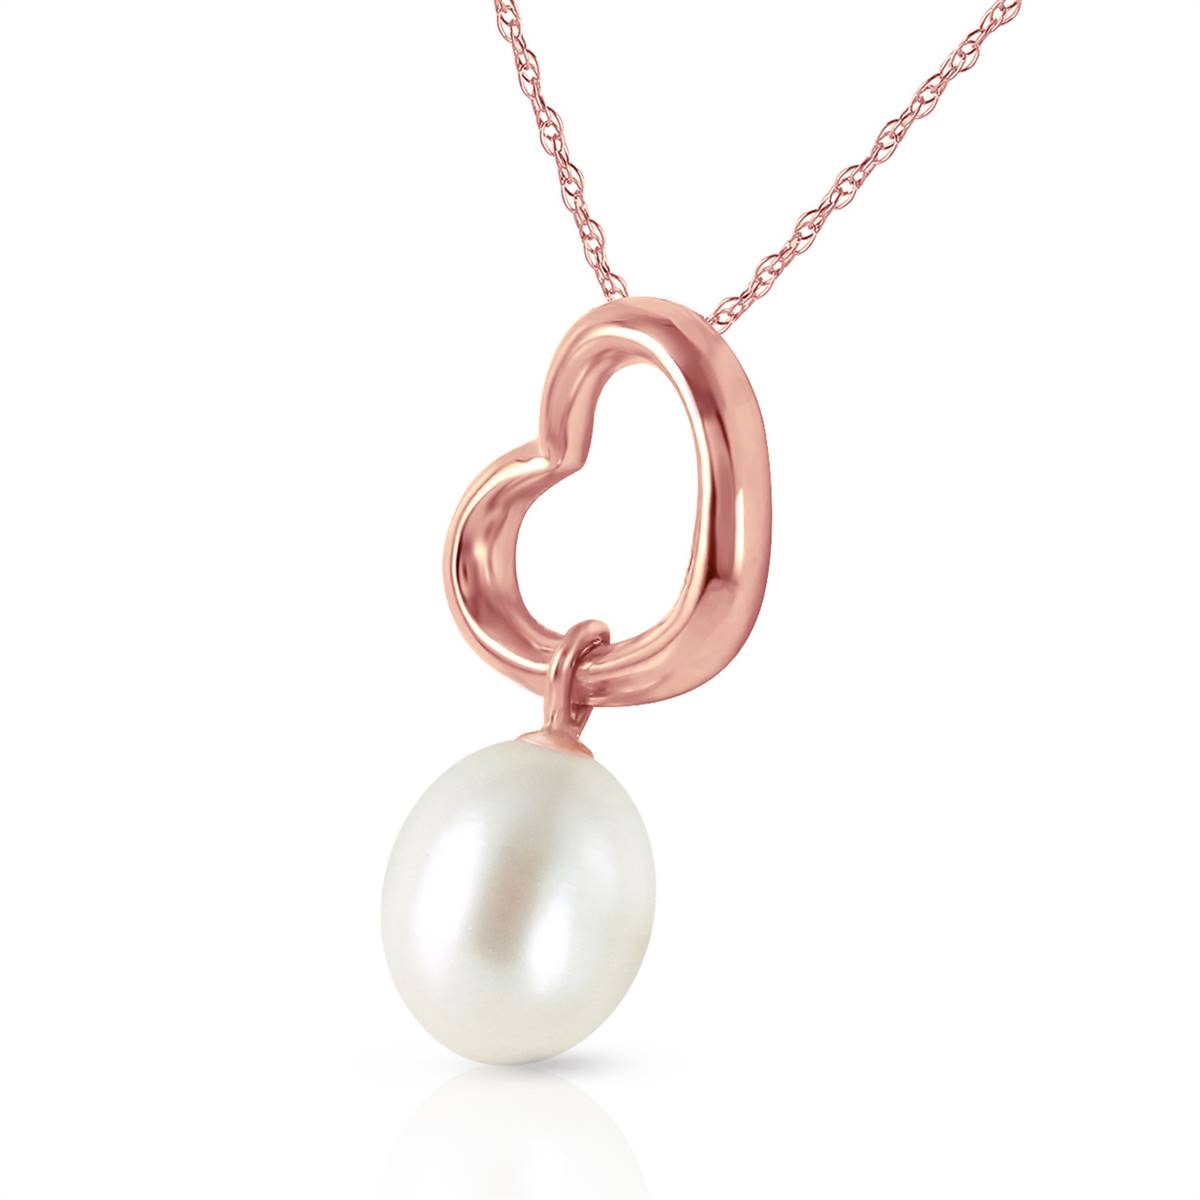 14K Solid Rose Gold Heart Necklace w/ Dangling Natural Pearl